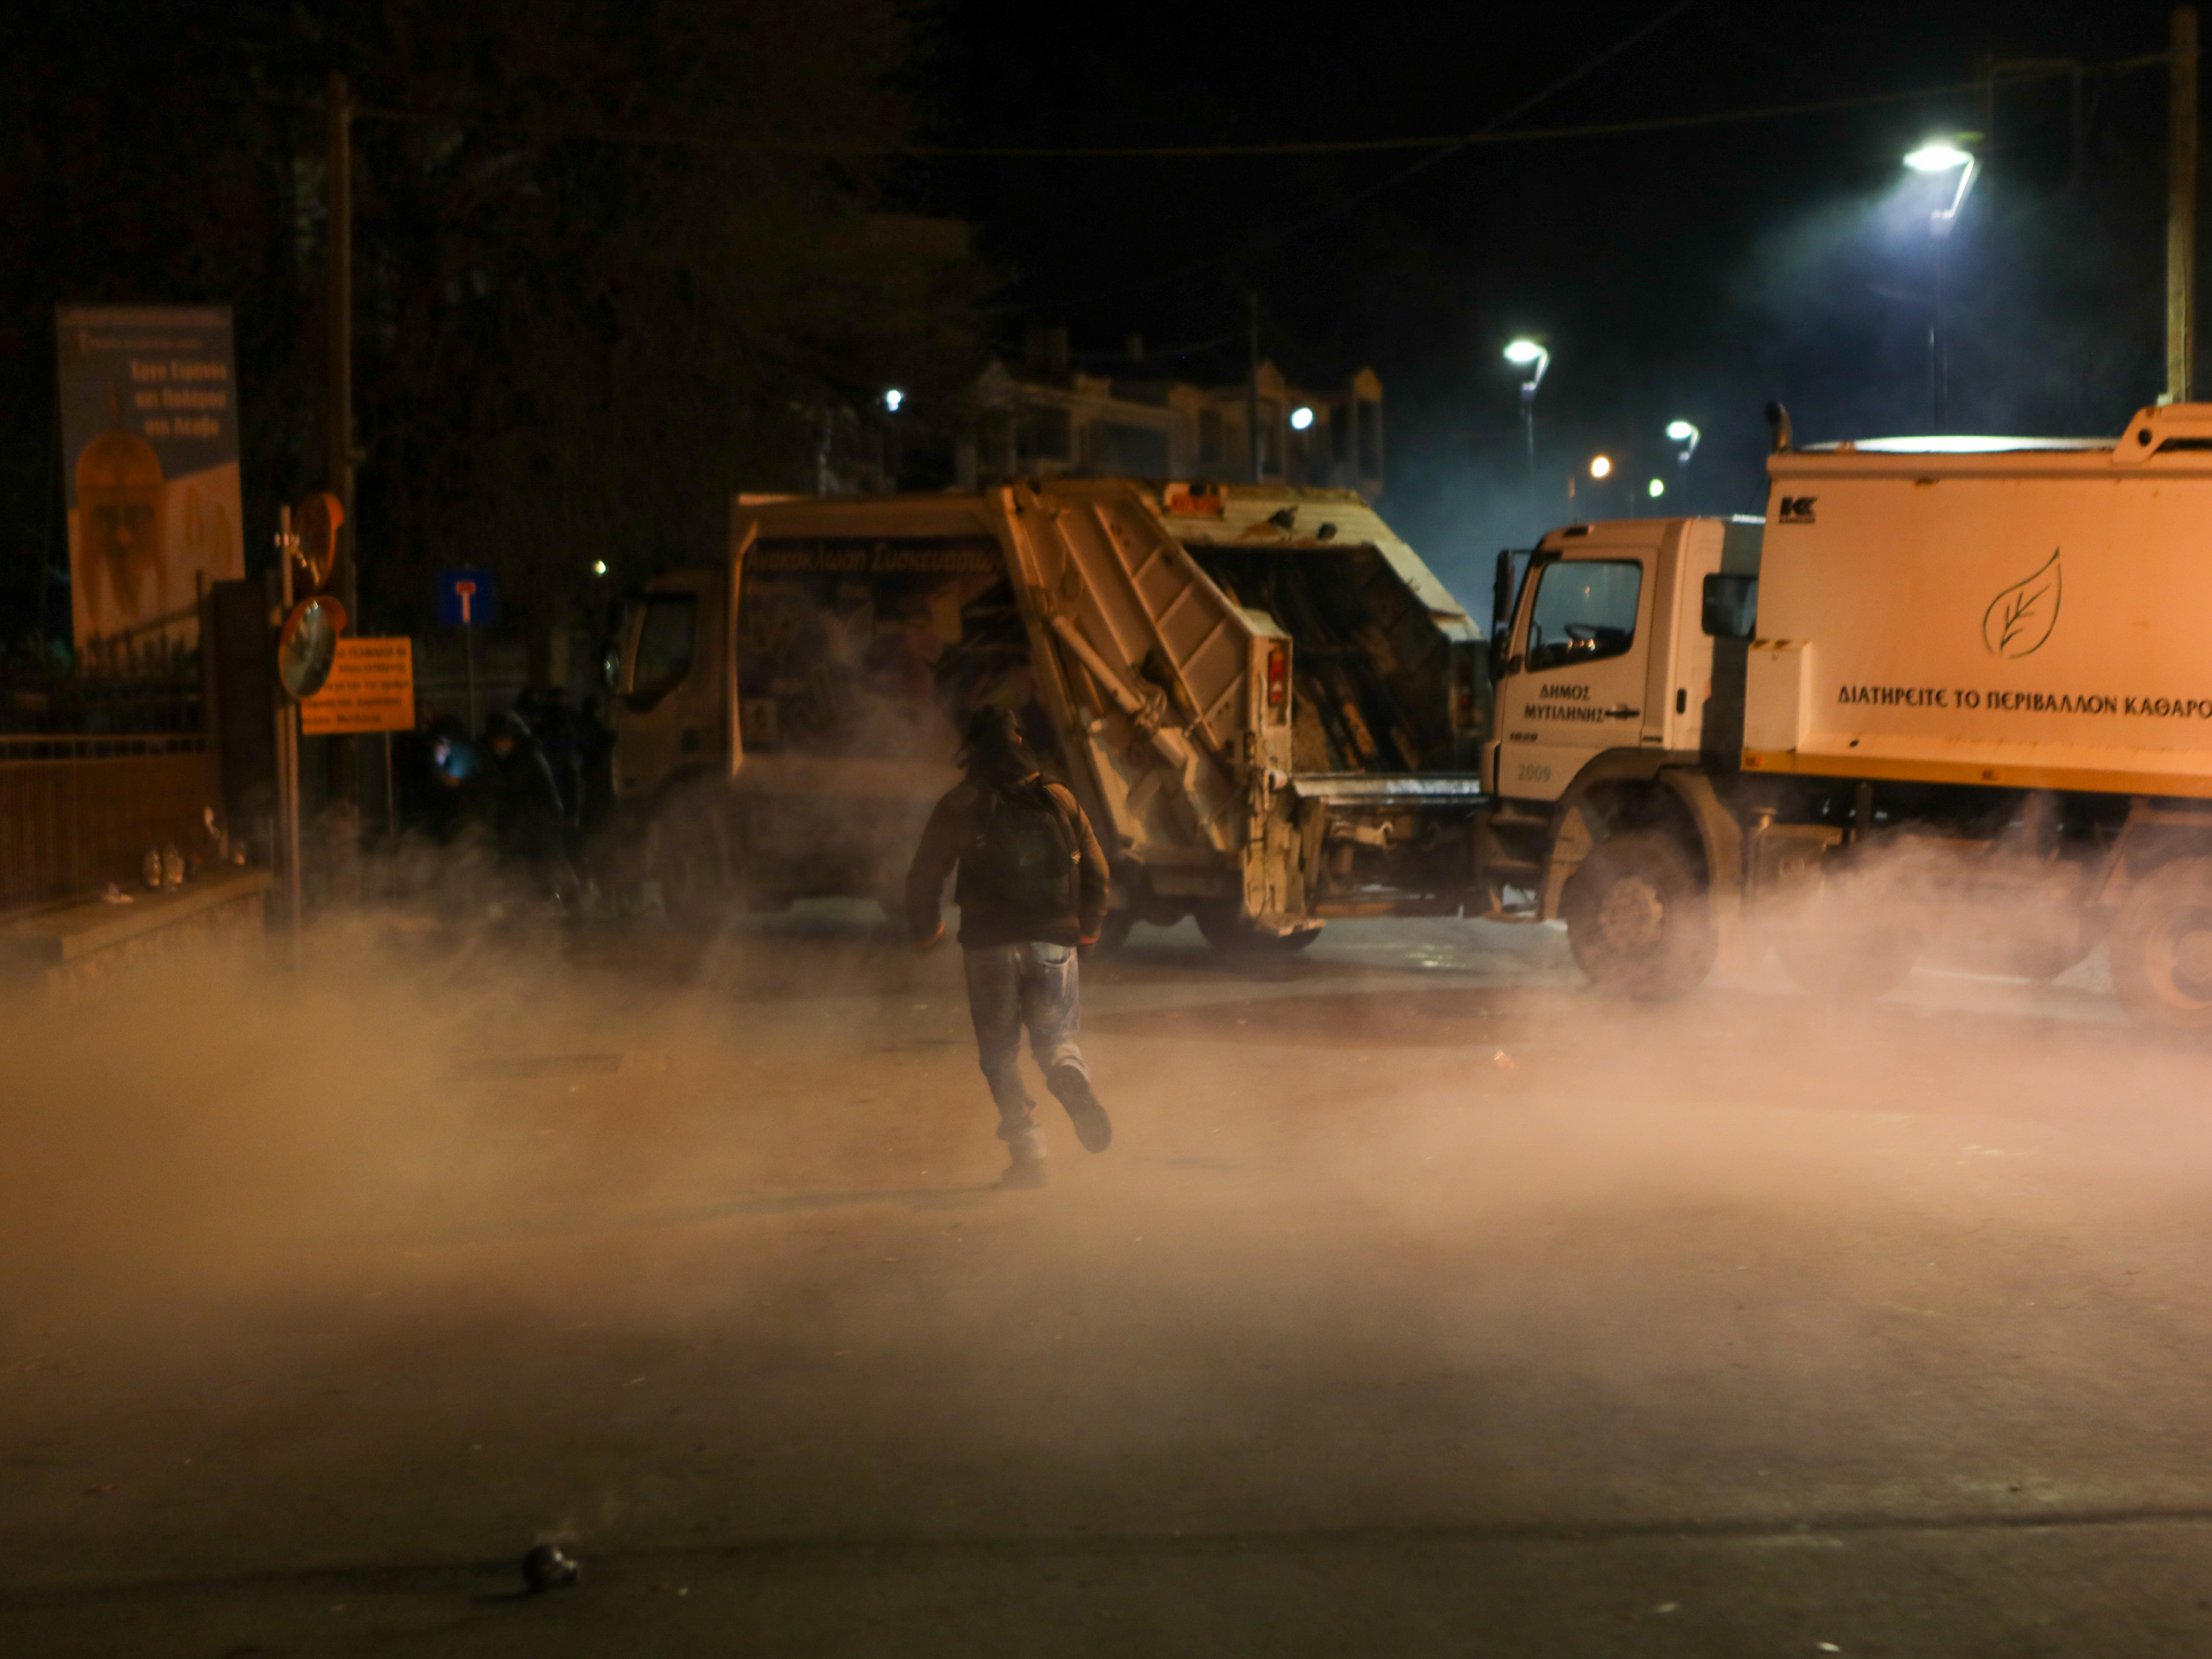 Tear gas swirls around bin lorries commandeered by protesters to block the roads